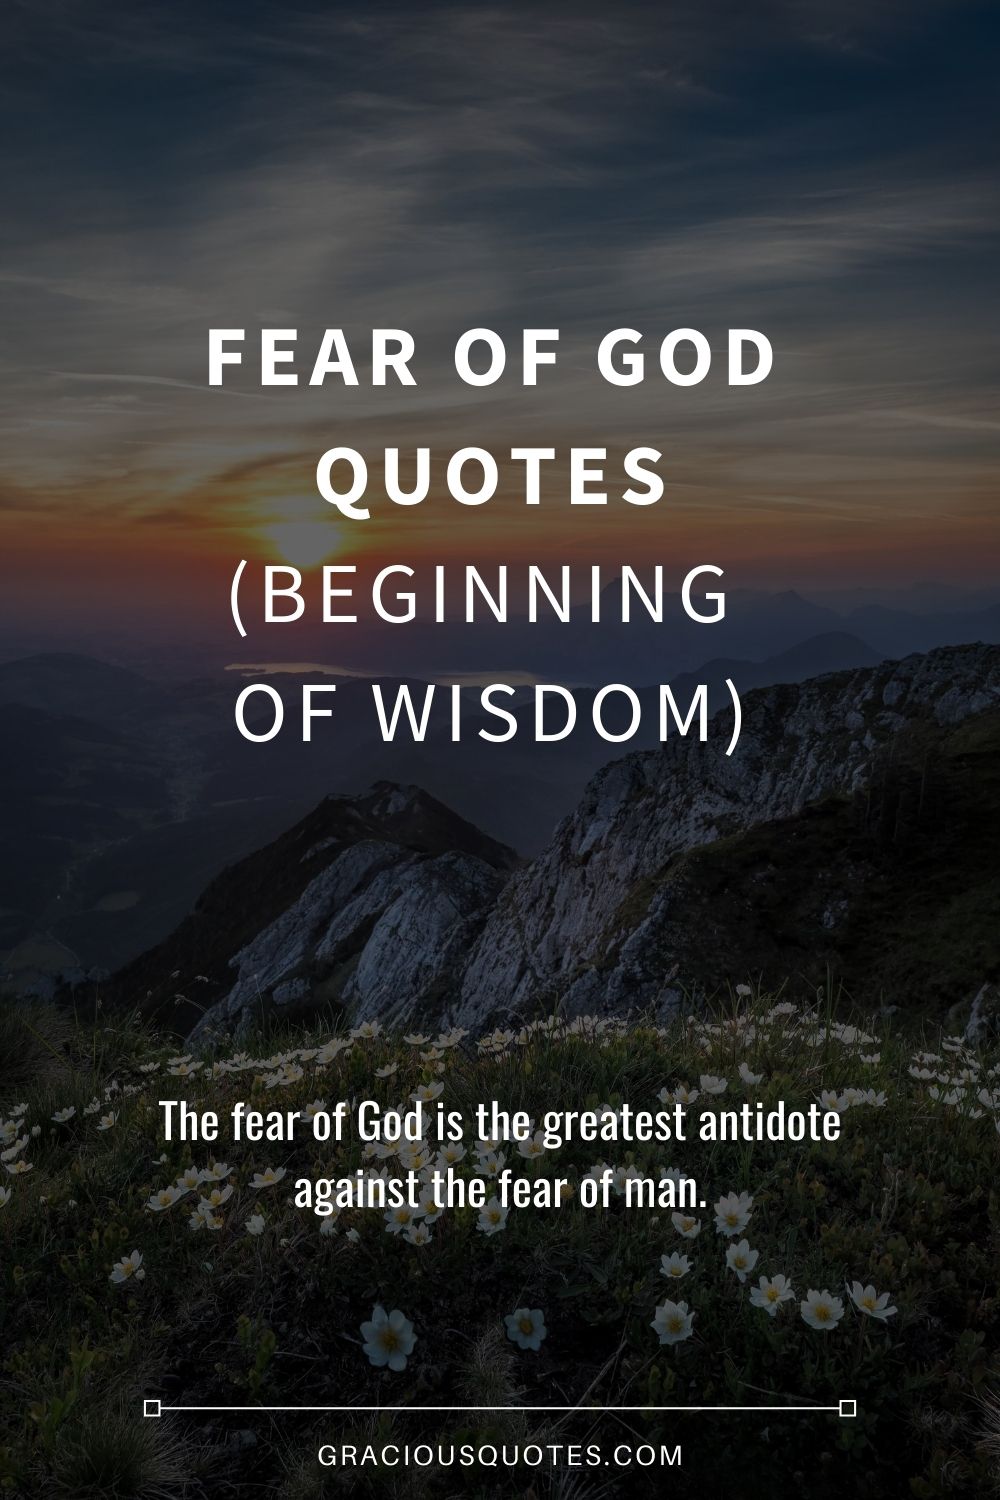 27 Fear of God Quotes (BEGINNING OF WISDOM)